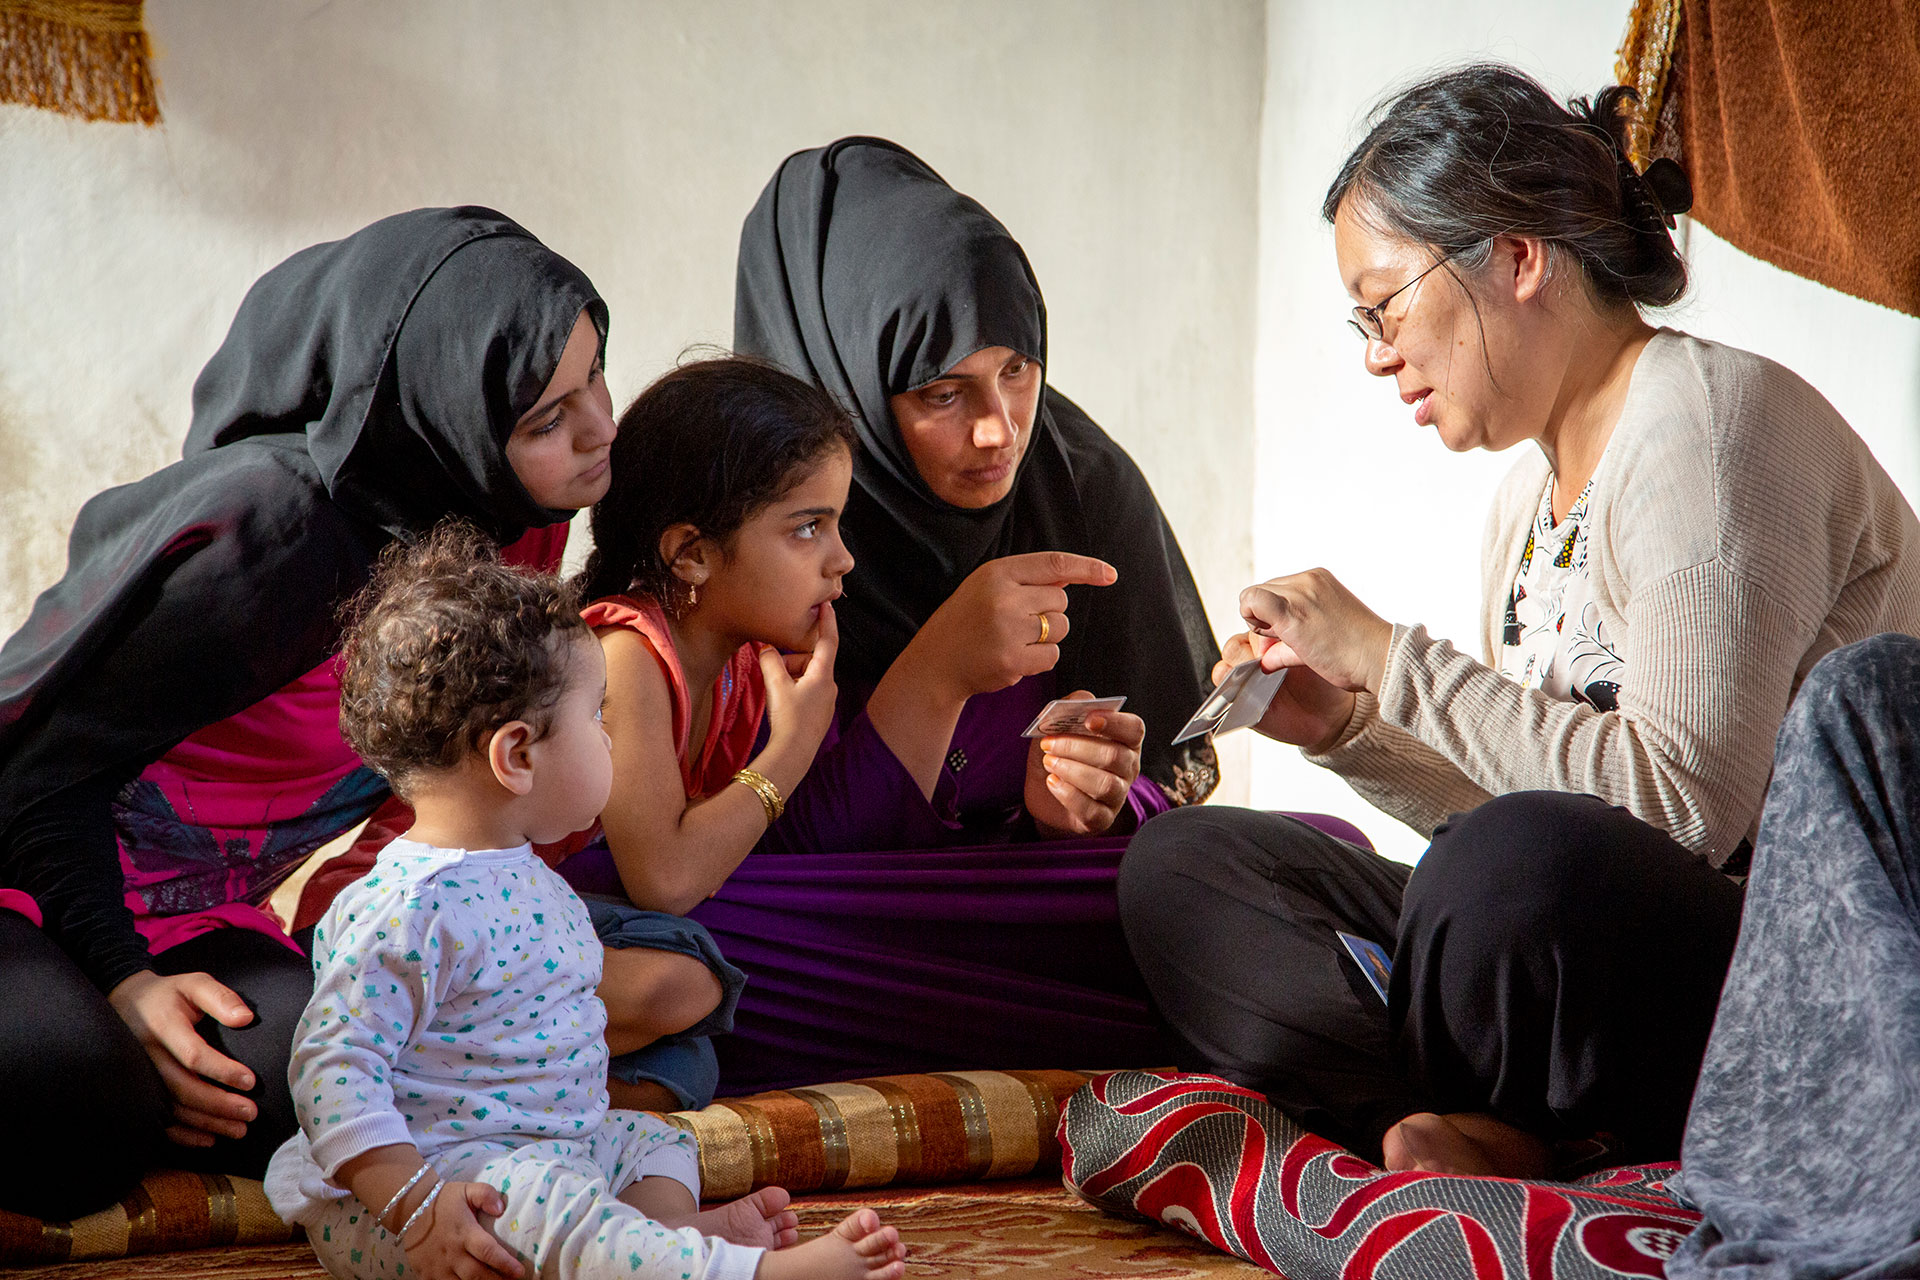 Asian American female missionary telling a story, sitting on cushions with children and mothers wearing hijabs